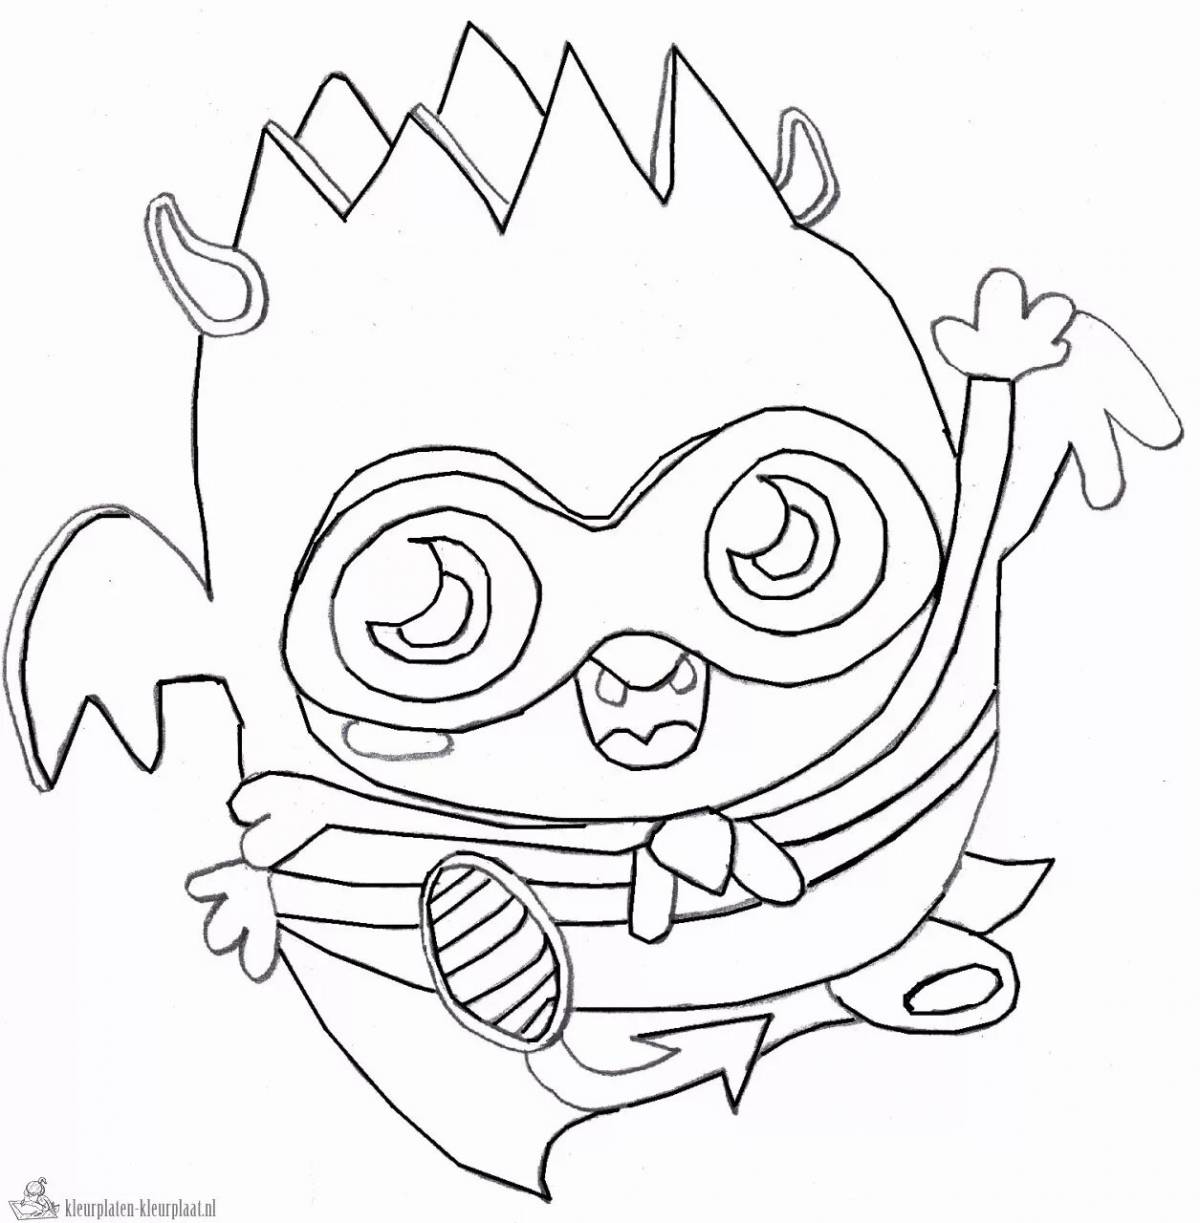 Coloring book bright musical monsters